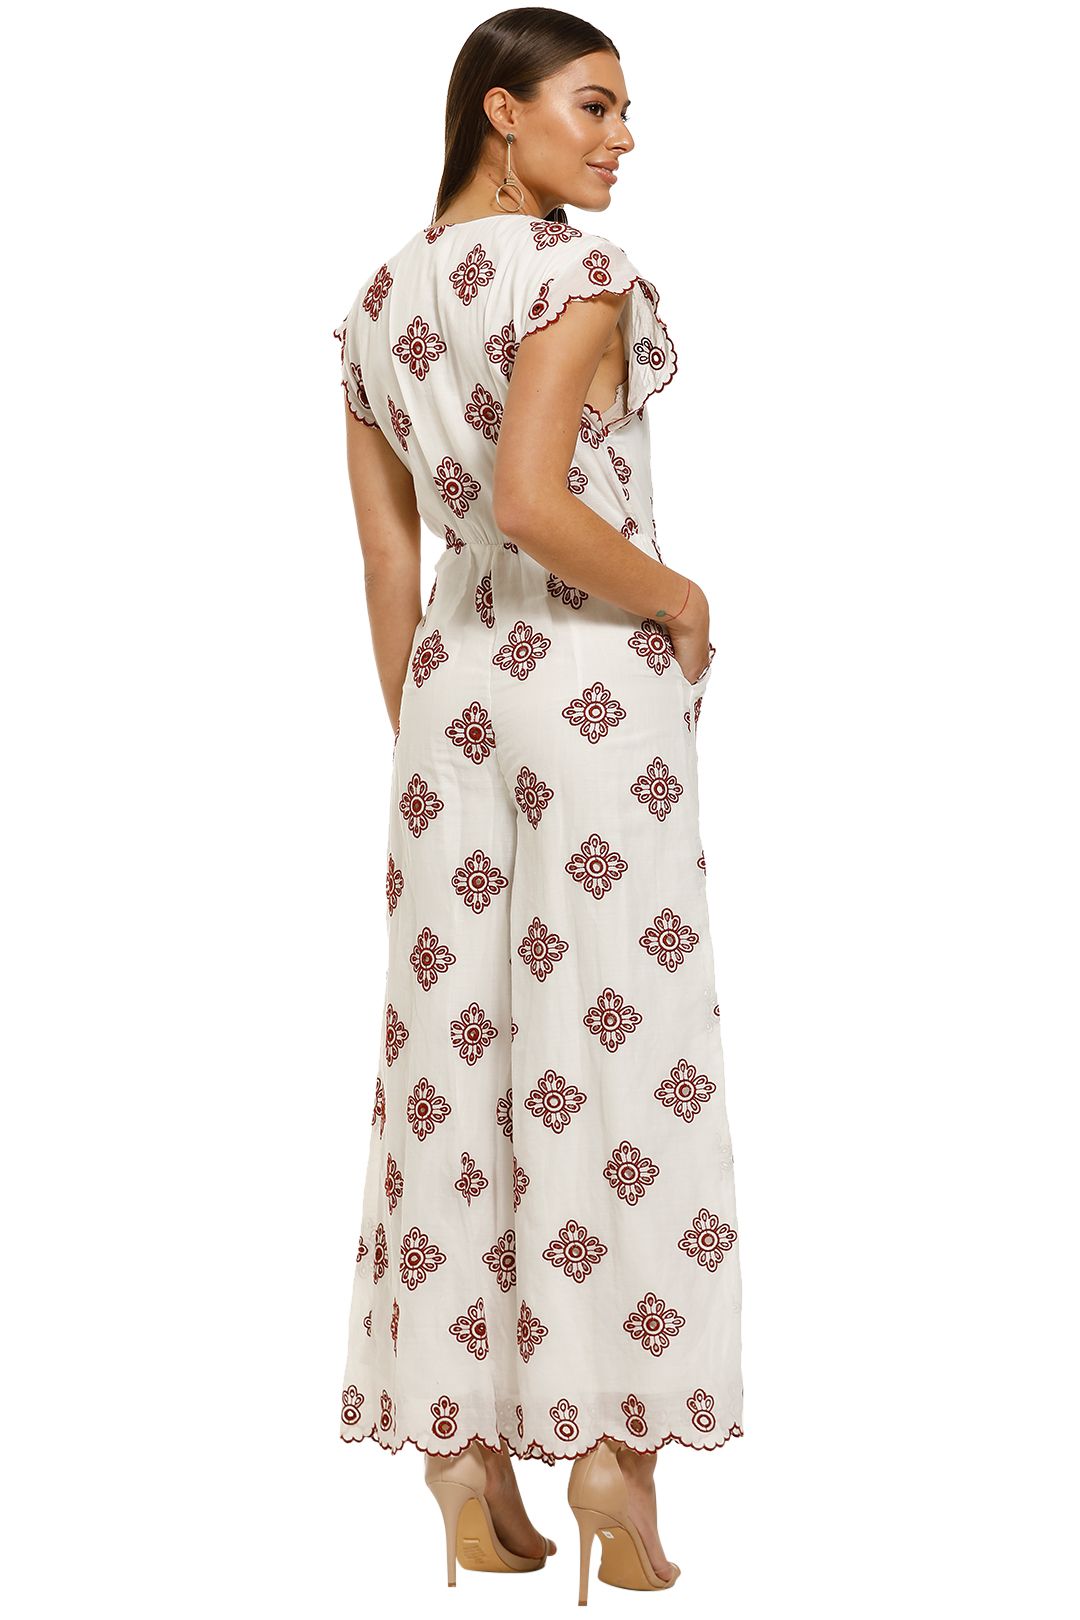 Stevie-May-Seize-It-Jumpsuit-White-and-Berry-Anglaise-Back